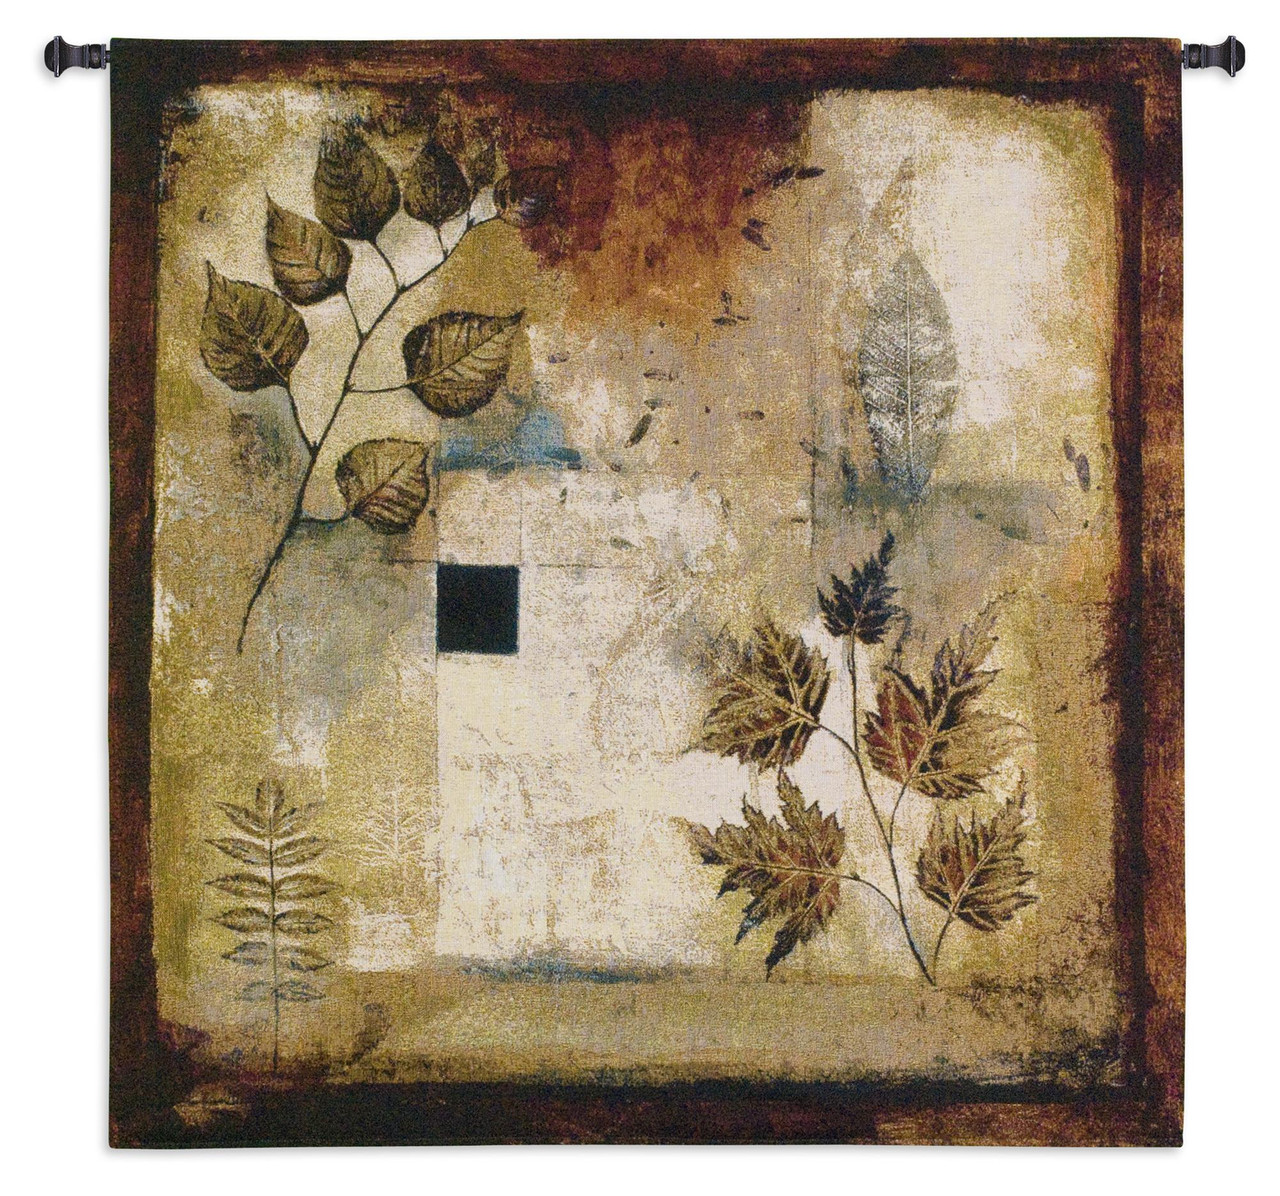 Ephemeral Creation by Jae Dougal Woven Tapestry Wall Art Hanging Russet  Earth Toned Contemporary Leaf Pattern 100% Cotton USA Size 35x35